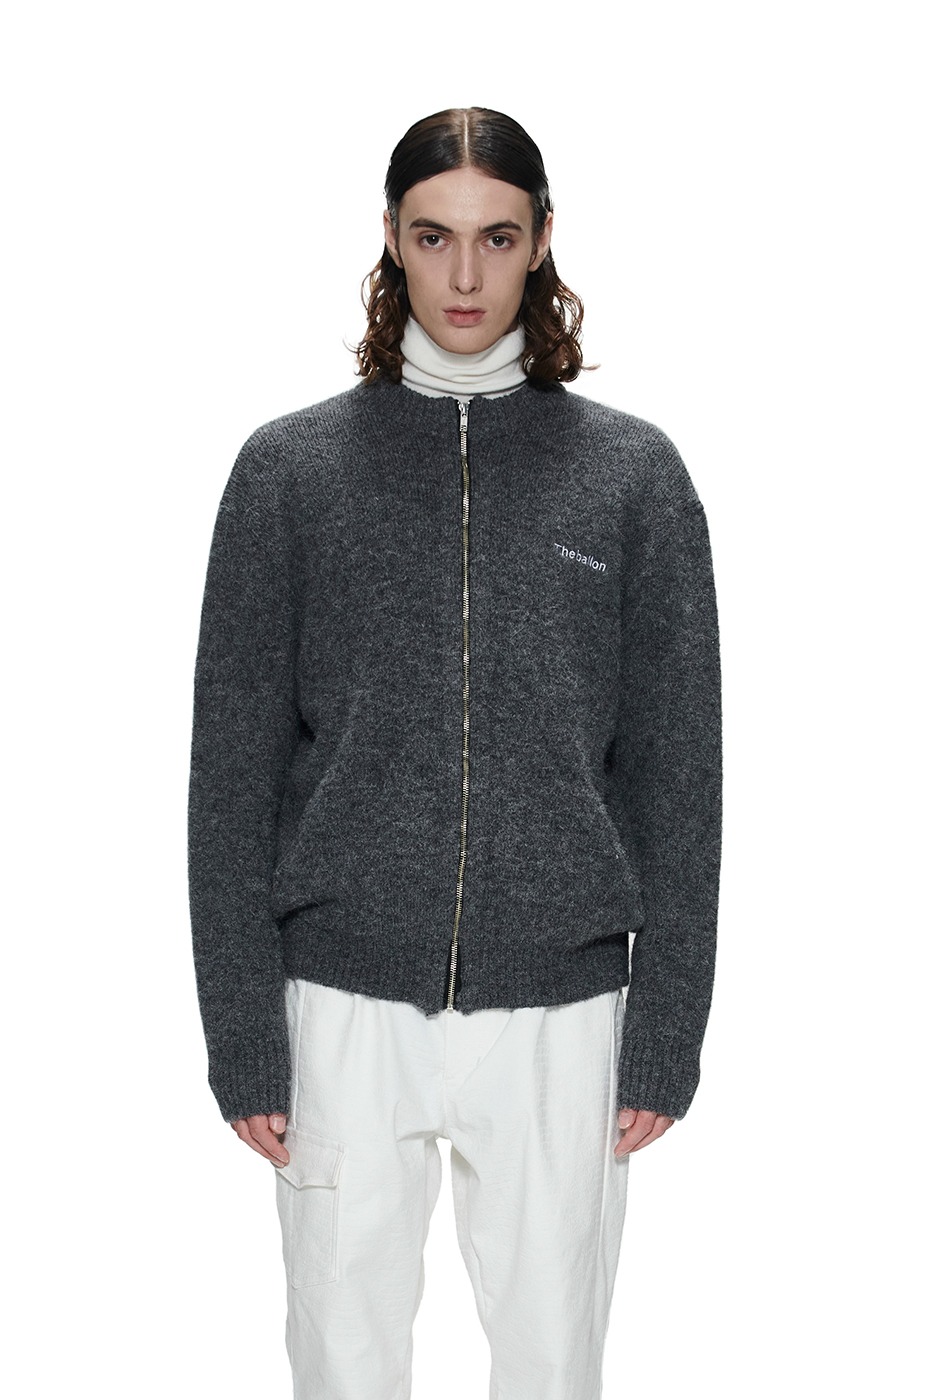 EMBROIDER KNIT ZIP UP - GRAY